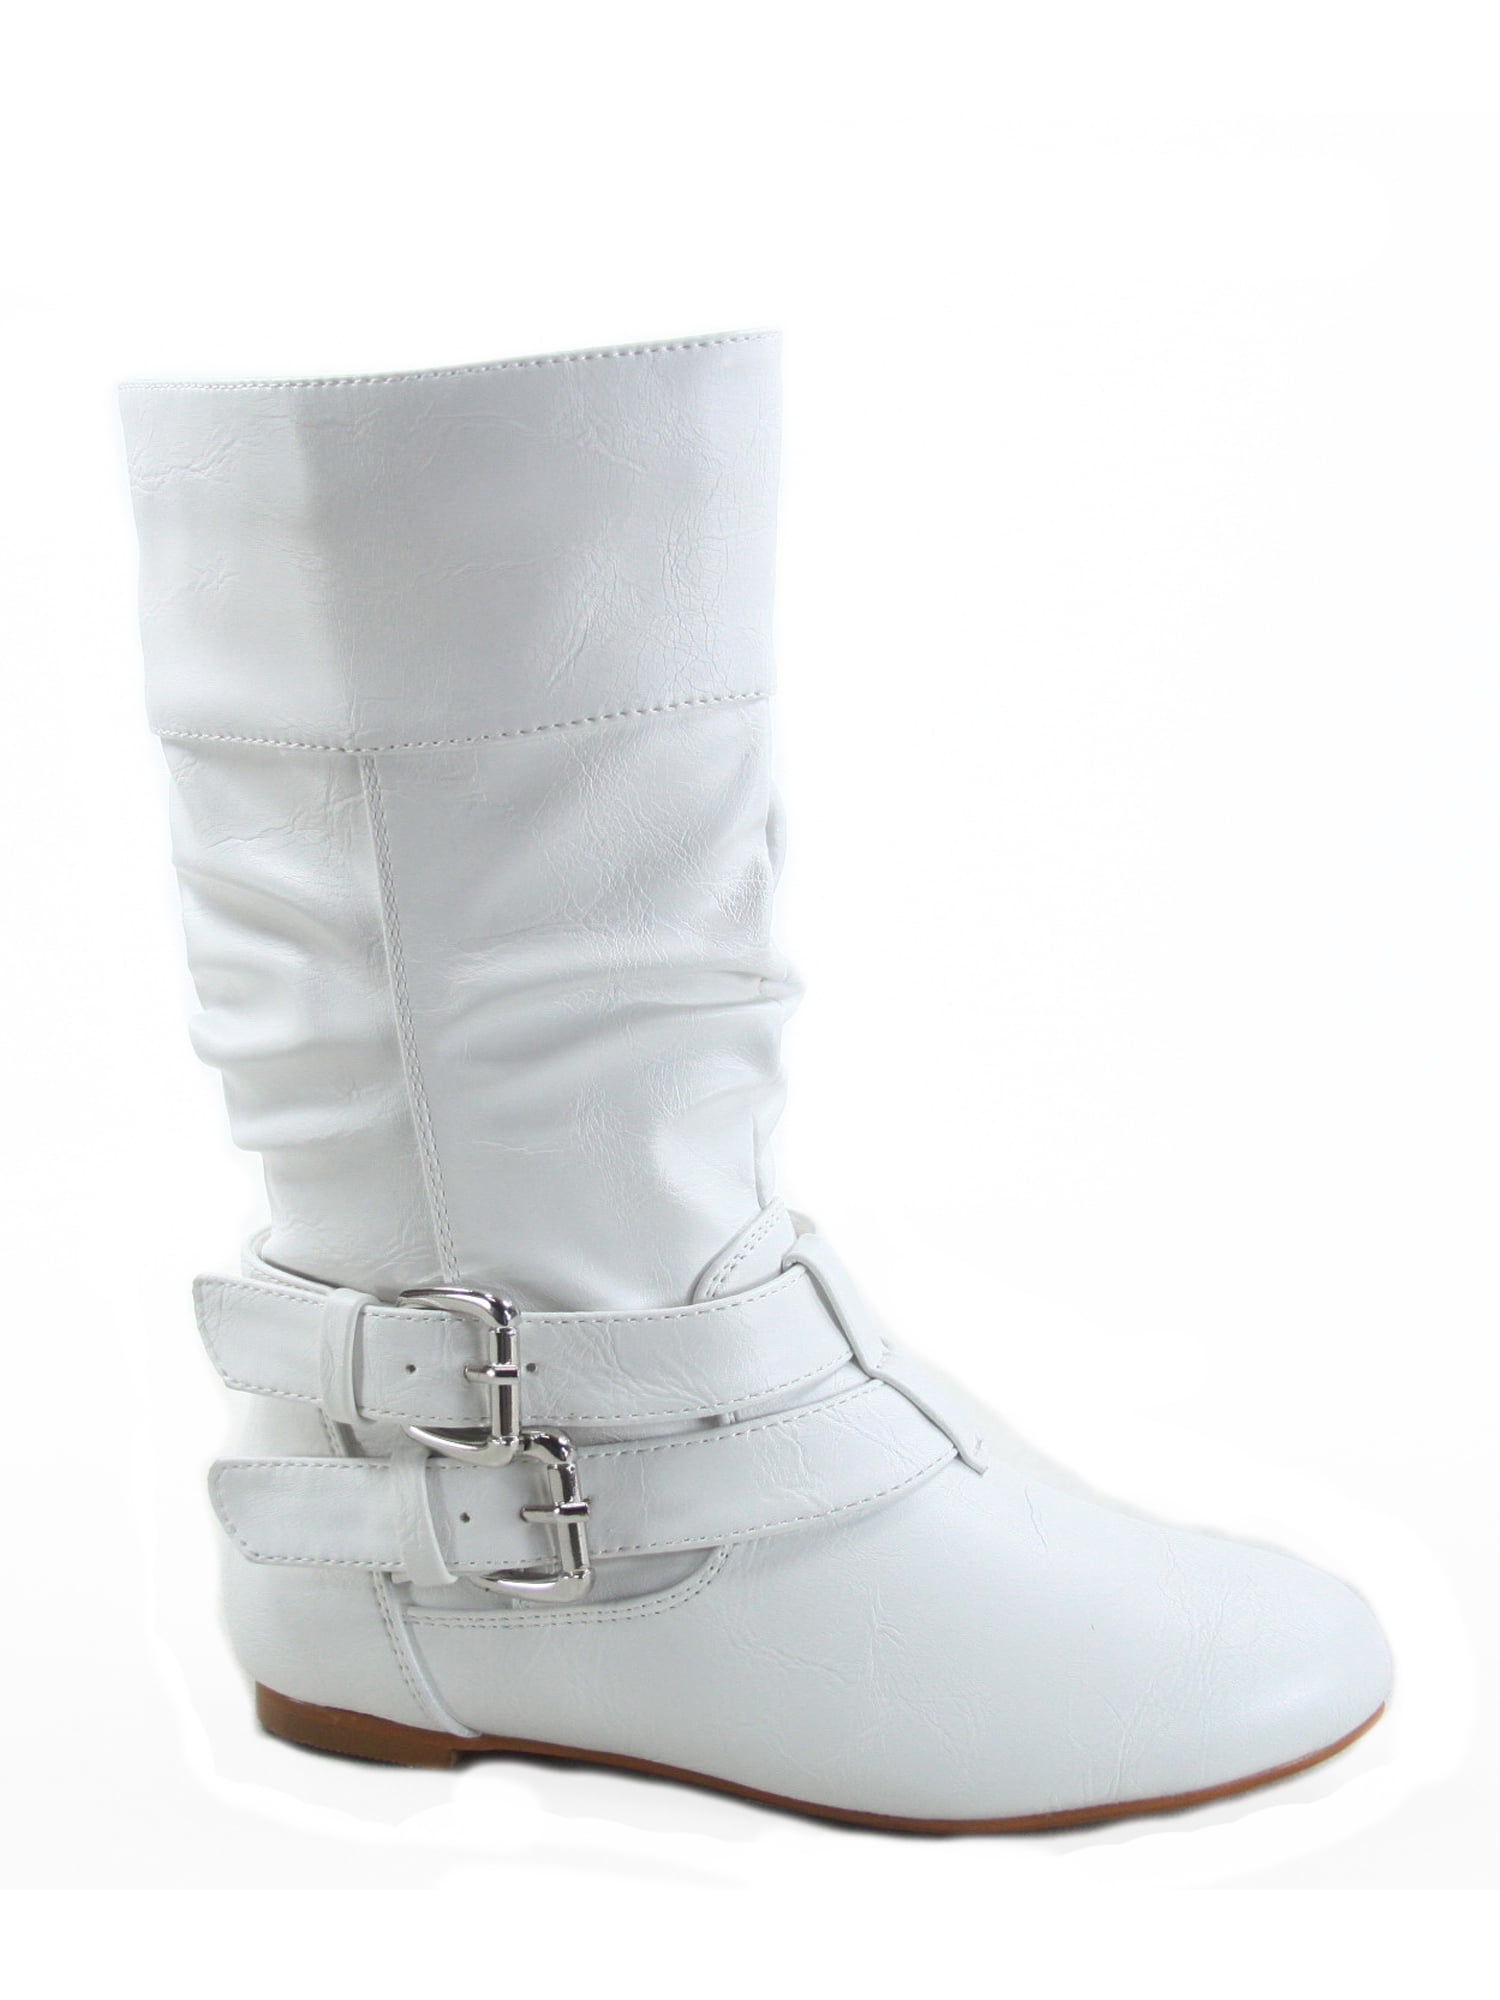 Details about   Causal Womens Pull On Round Toe Knee High Boots Winter New Warm Boots Plus Size 